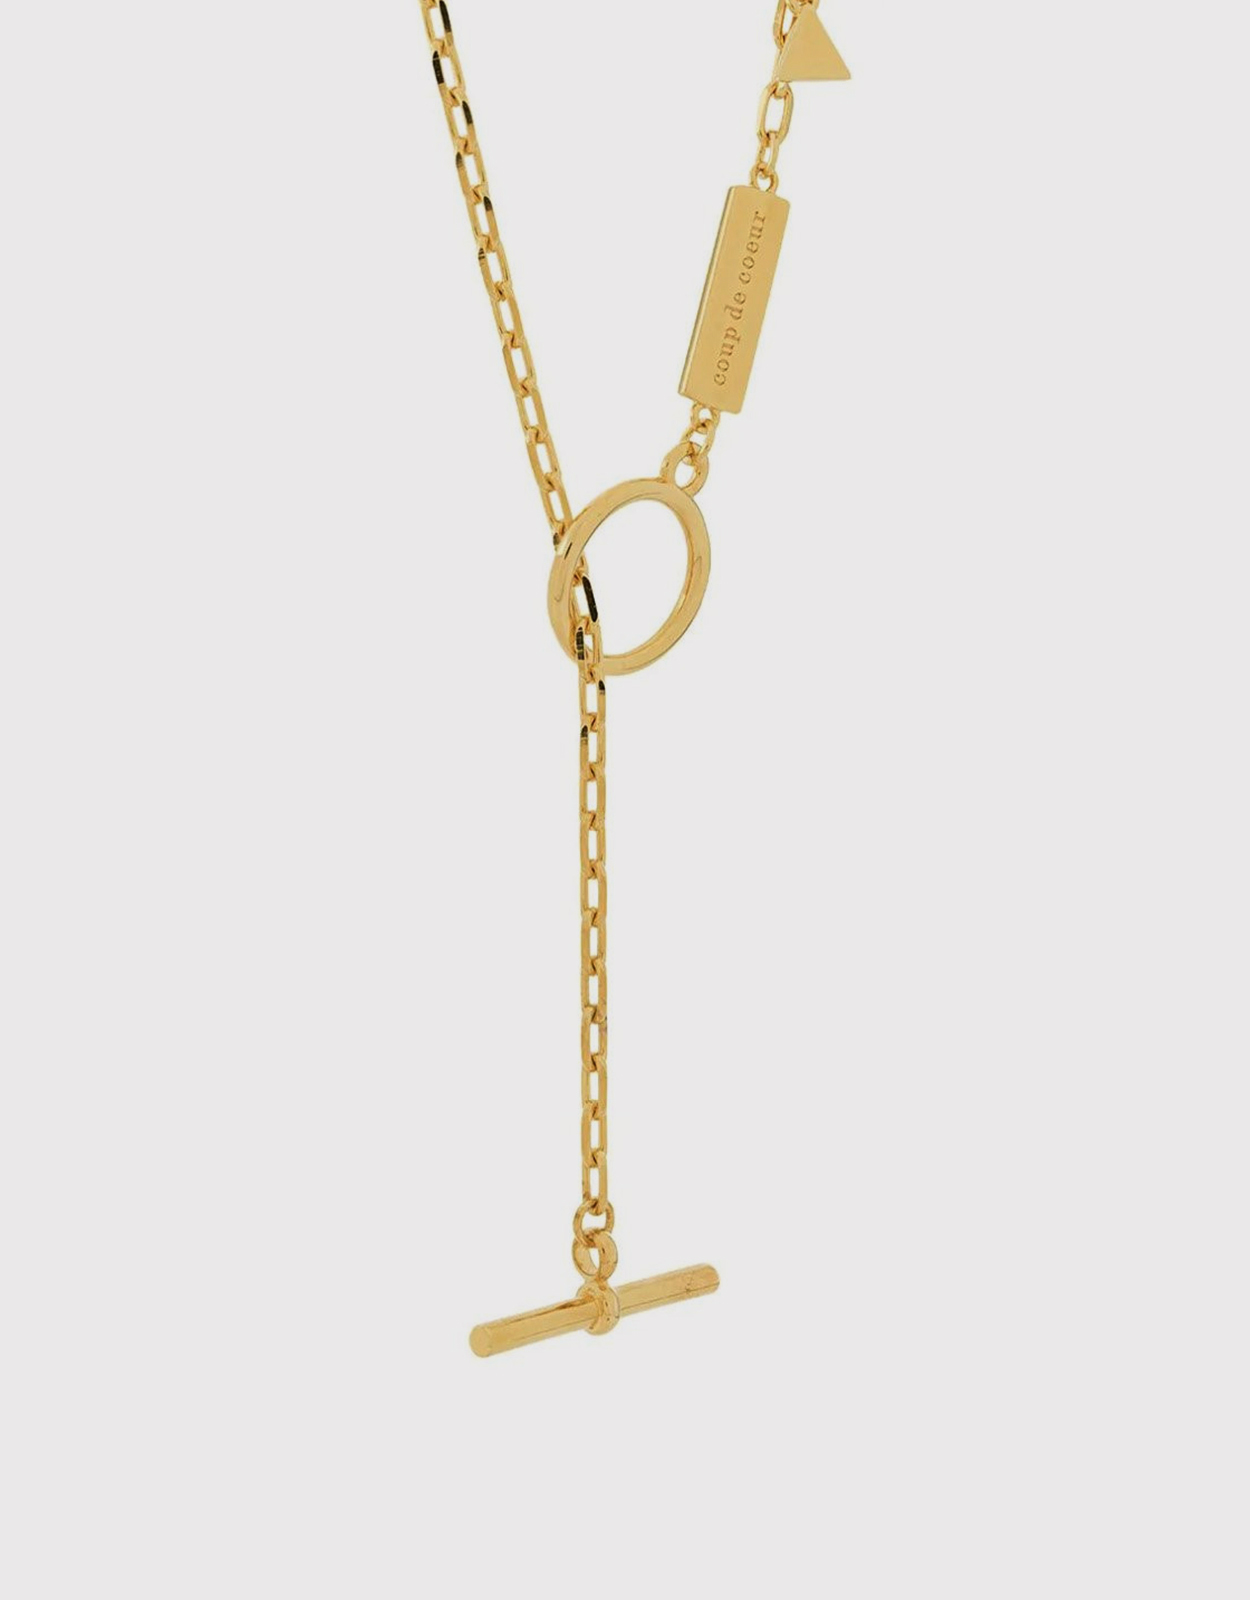 Personalised Monogram Necklace | Shop Now | Frankly My Dear Store